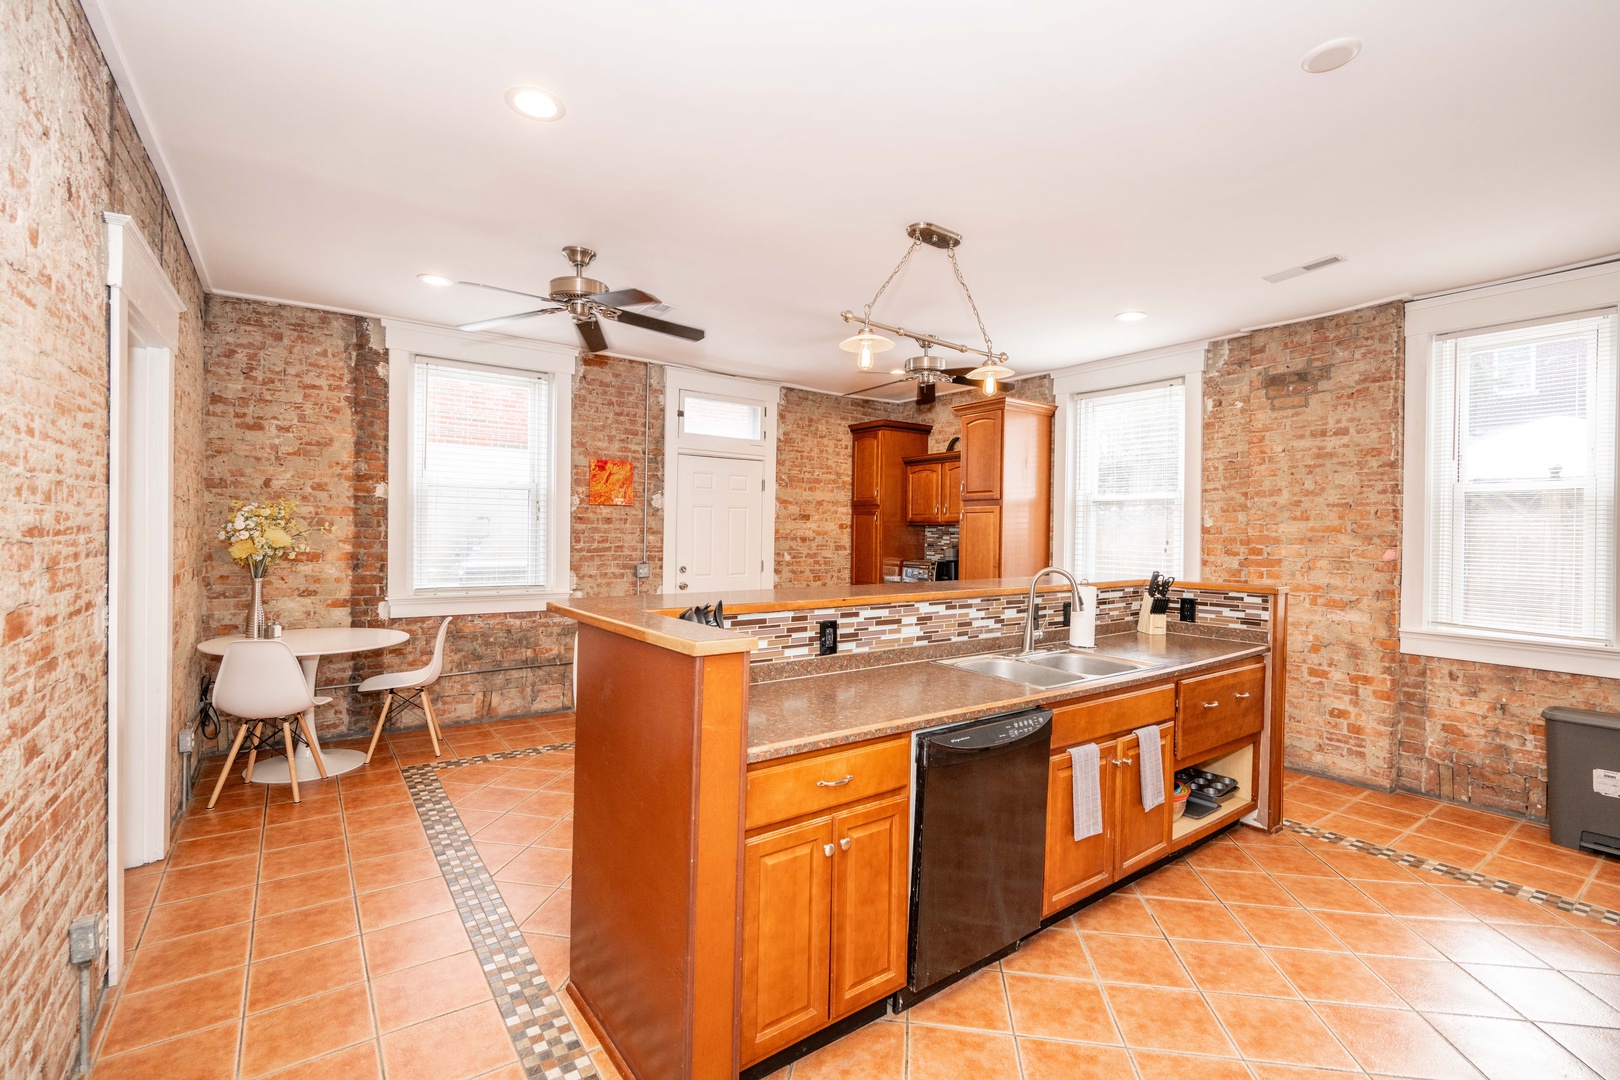 The kitchen showcases exposed brick, ample space, & numerous amenities